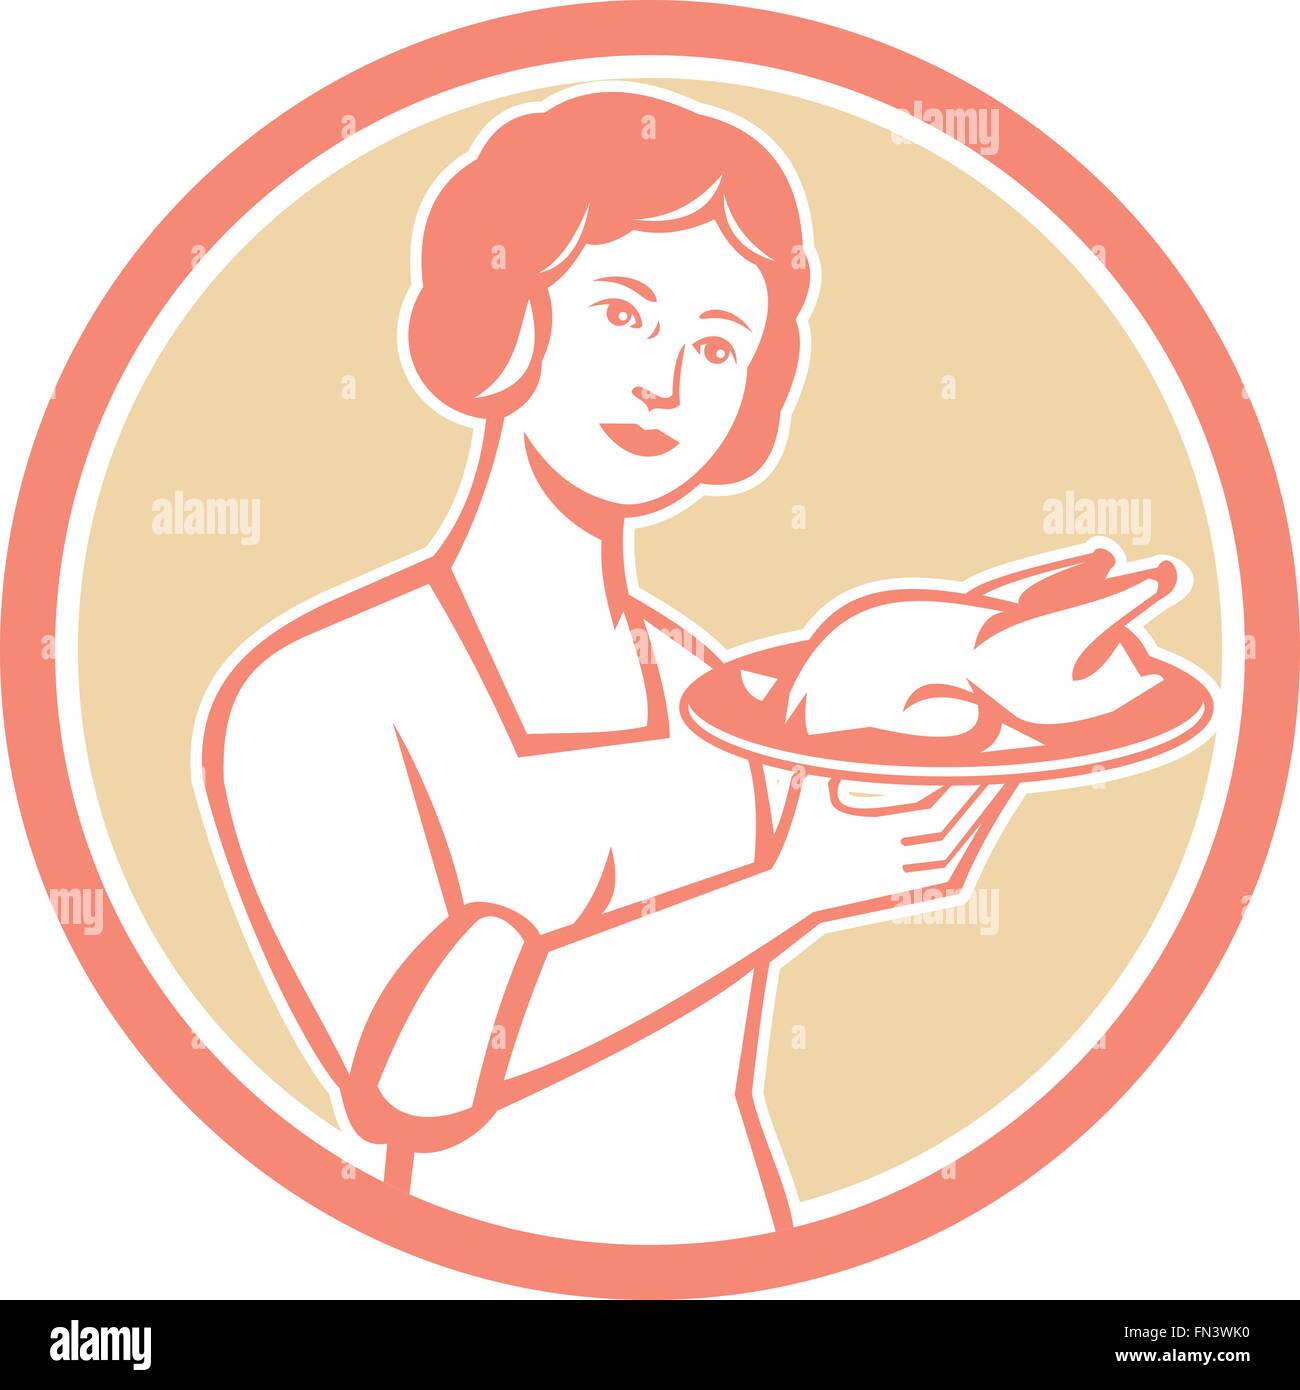 Illustration of a housewife woman serving chicken roast on plate platter viewed from front set inside circle done in retro style. Stock Vector